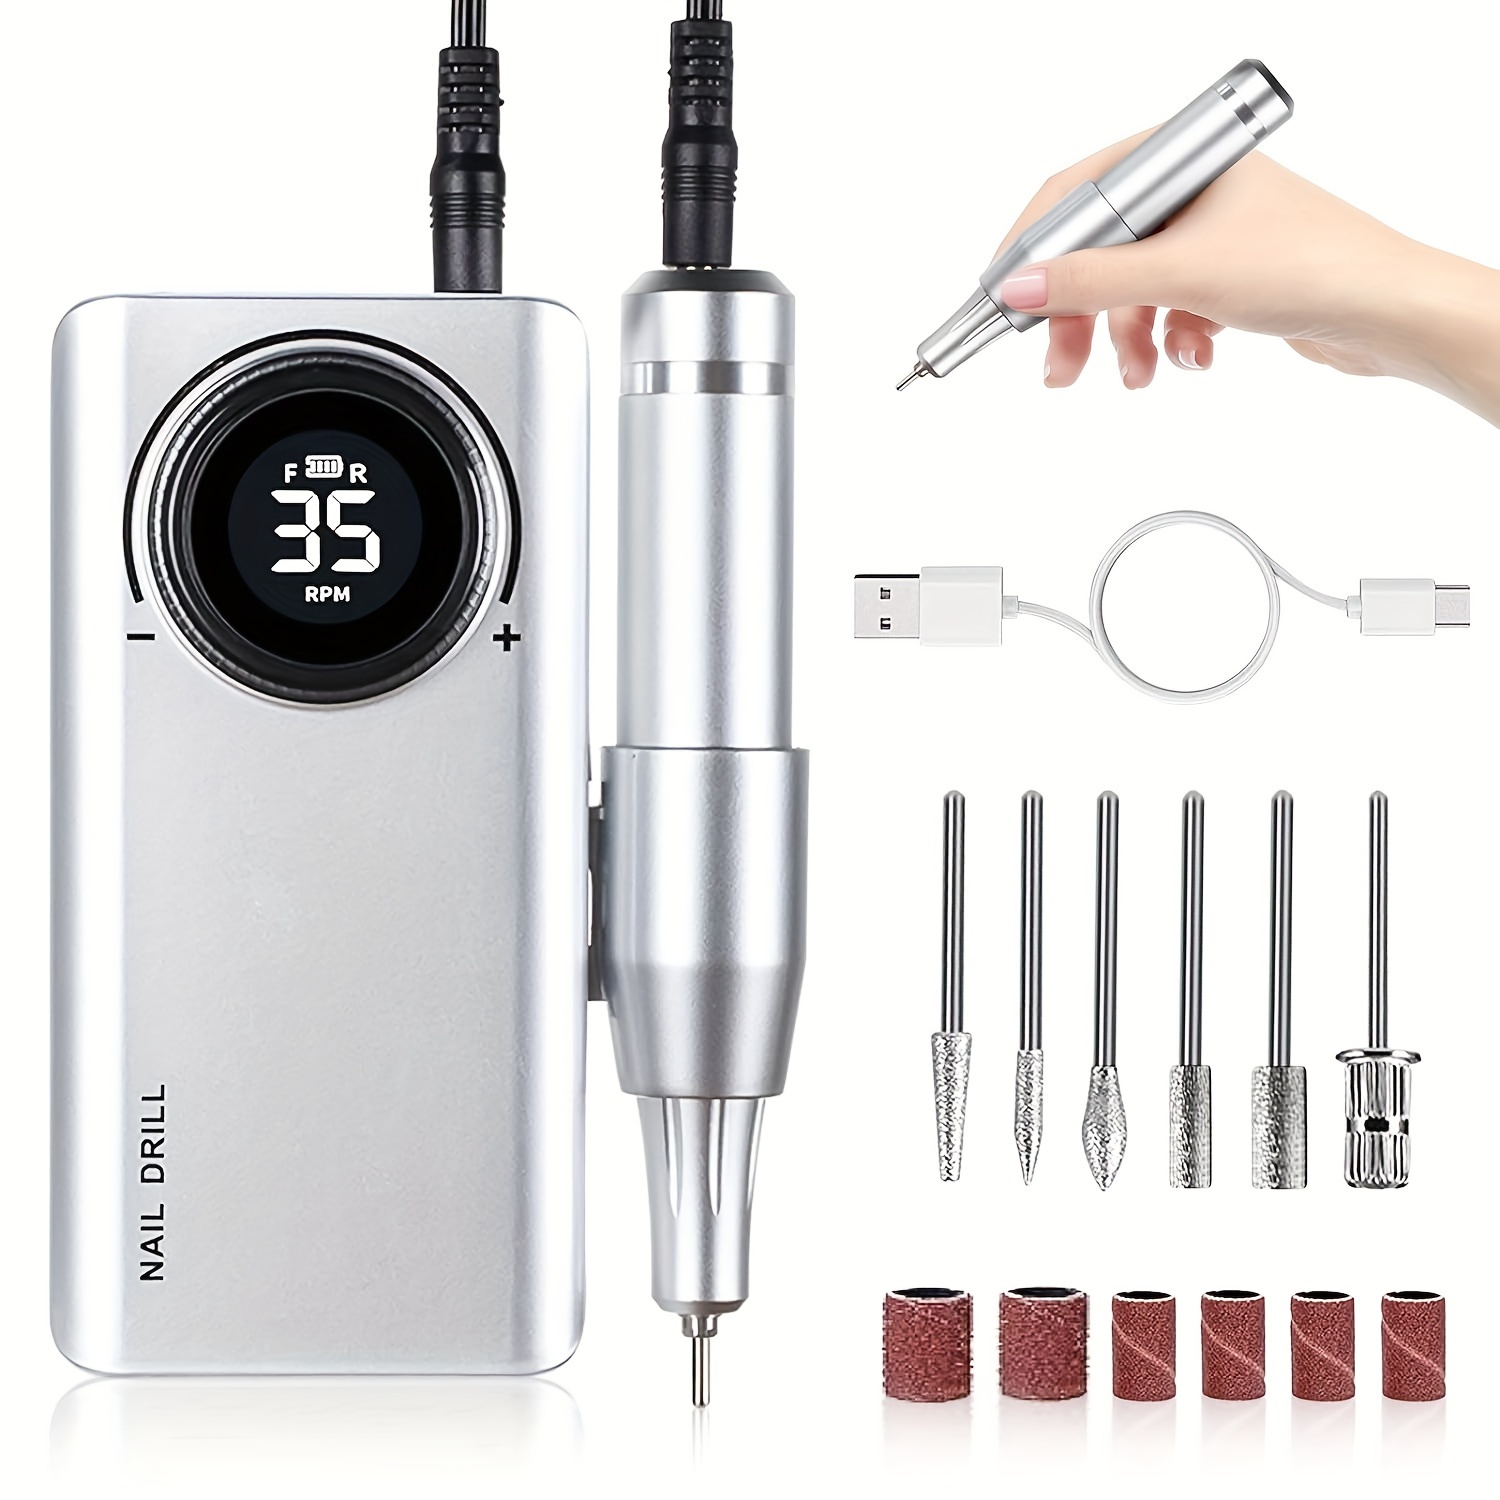 

Professional Electric Nail Drill, Portable Rechargeable 35000rpm Nail Drill, Suitable For Acrylic Gel Nails, Manicure Pedicure Polishing Shape Tool, Suitable For Home And Salon Use